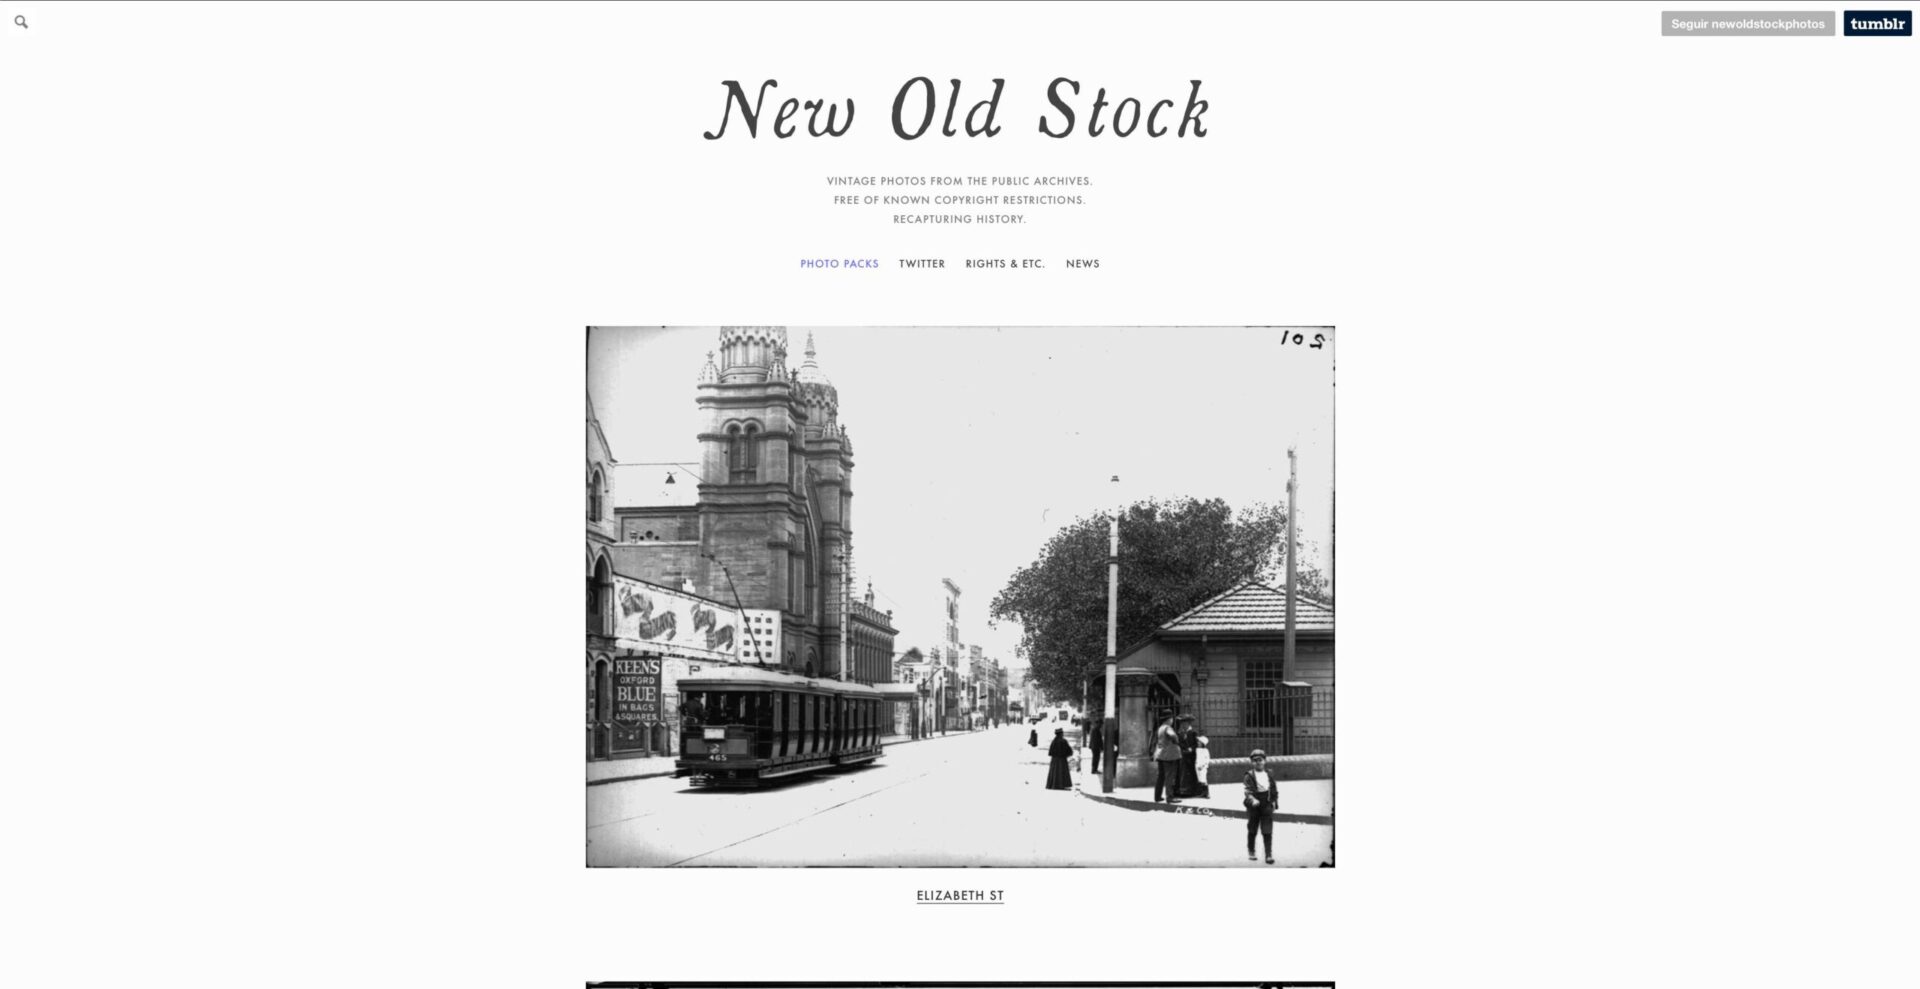 15 Free Stock Photography Websites You Should Be Using For Your Next Project - 07 Free Stock Websites newoldstock scaled 1